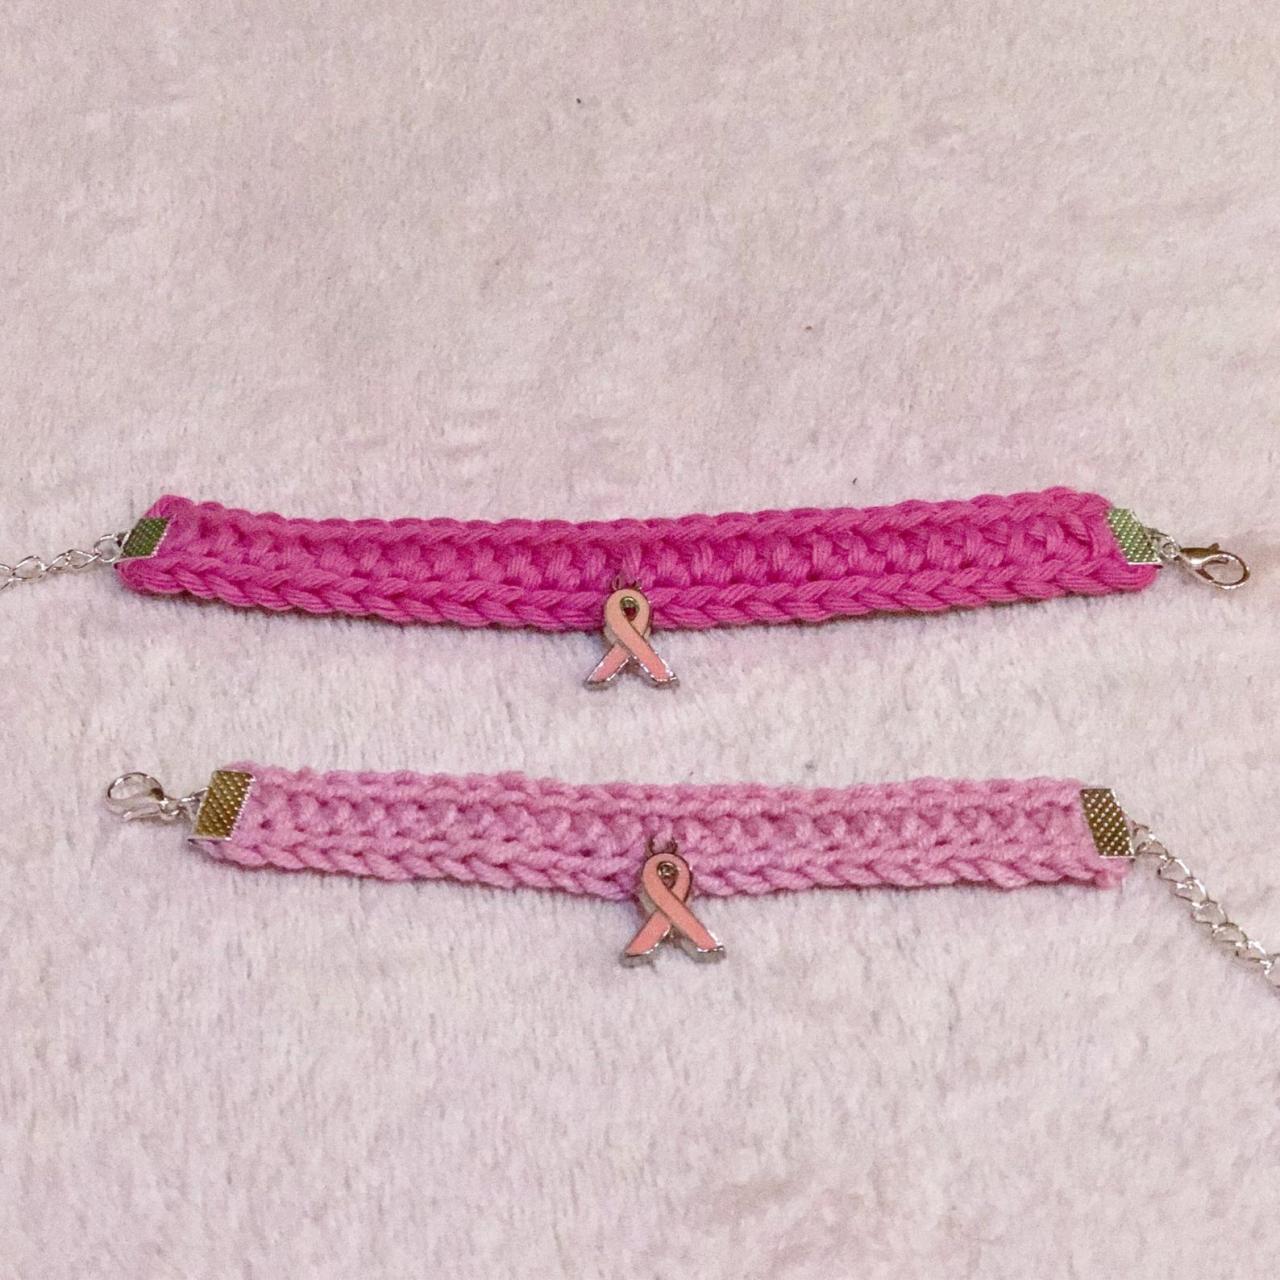 Crochet Bracelet - Limited EDition - Pink Bow- Breast Cancer Awareness- Simple Bracelet - Casual Bracelet - Chain Lobster Clasps Conn